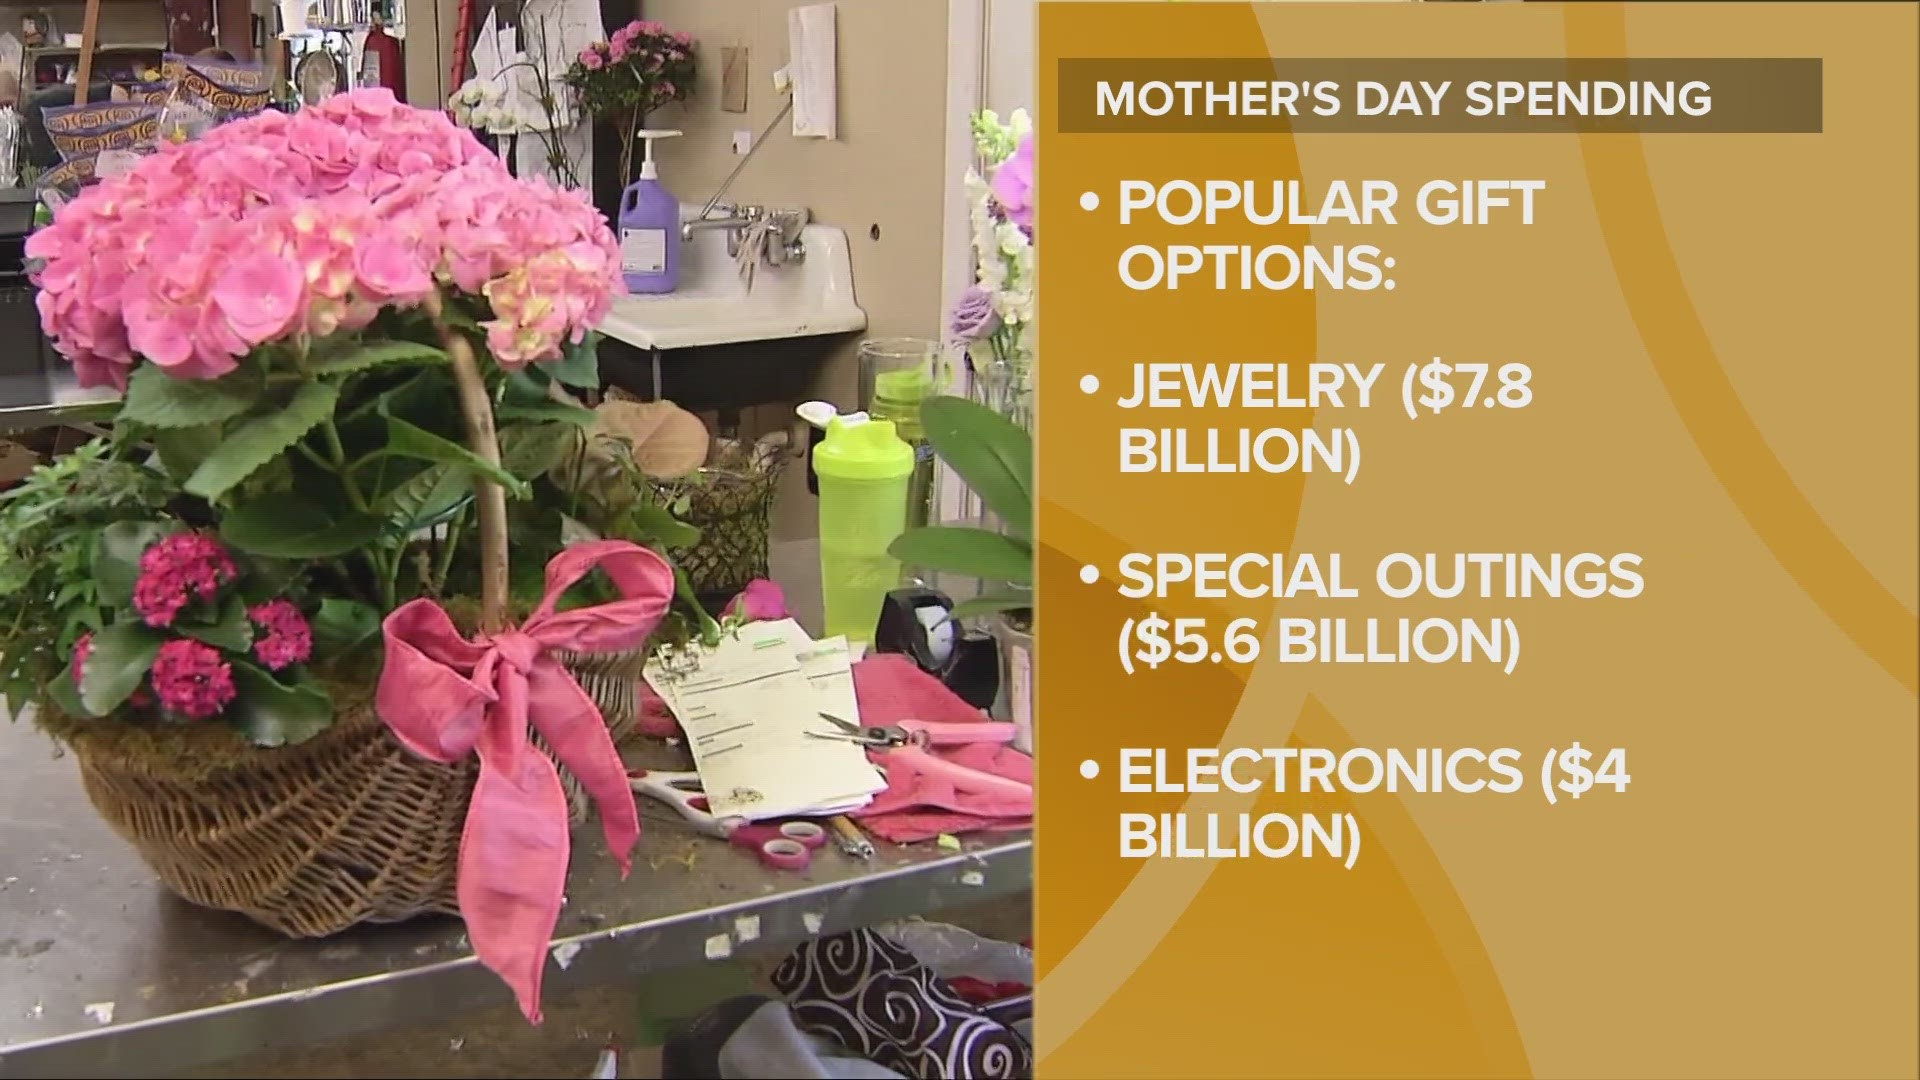 This Mother's Day, consumers are expected to spend $35.7 billion.